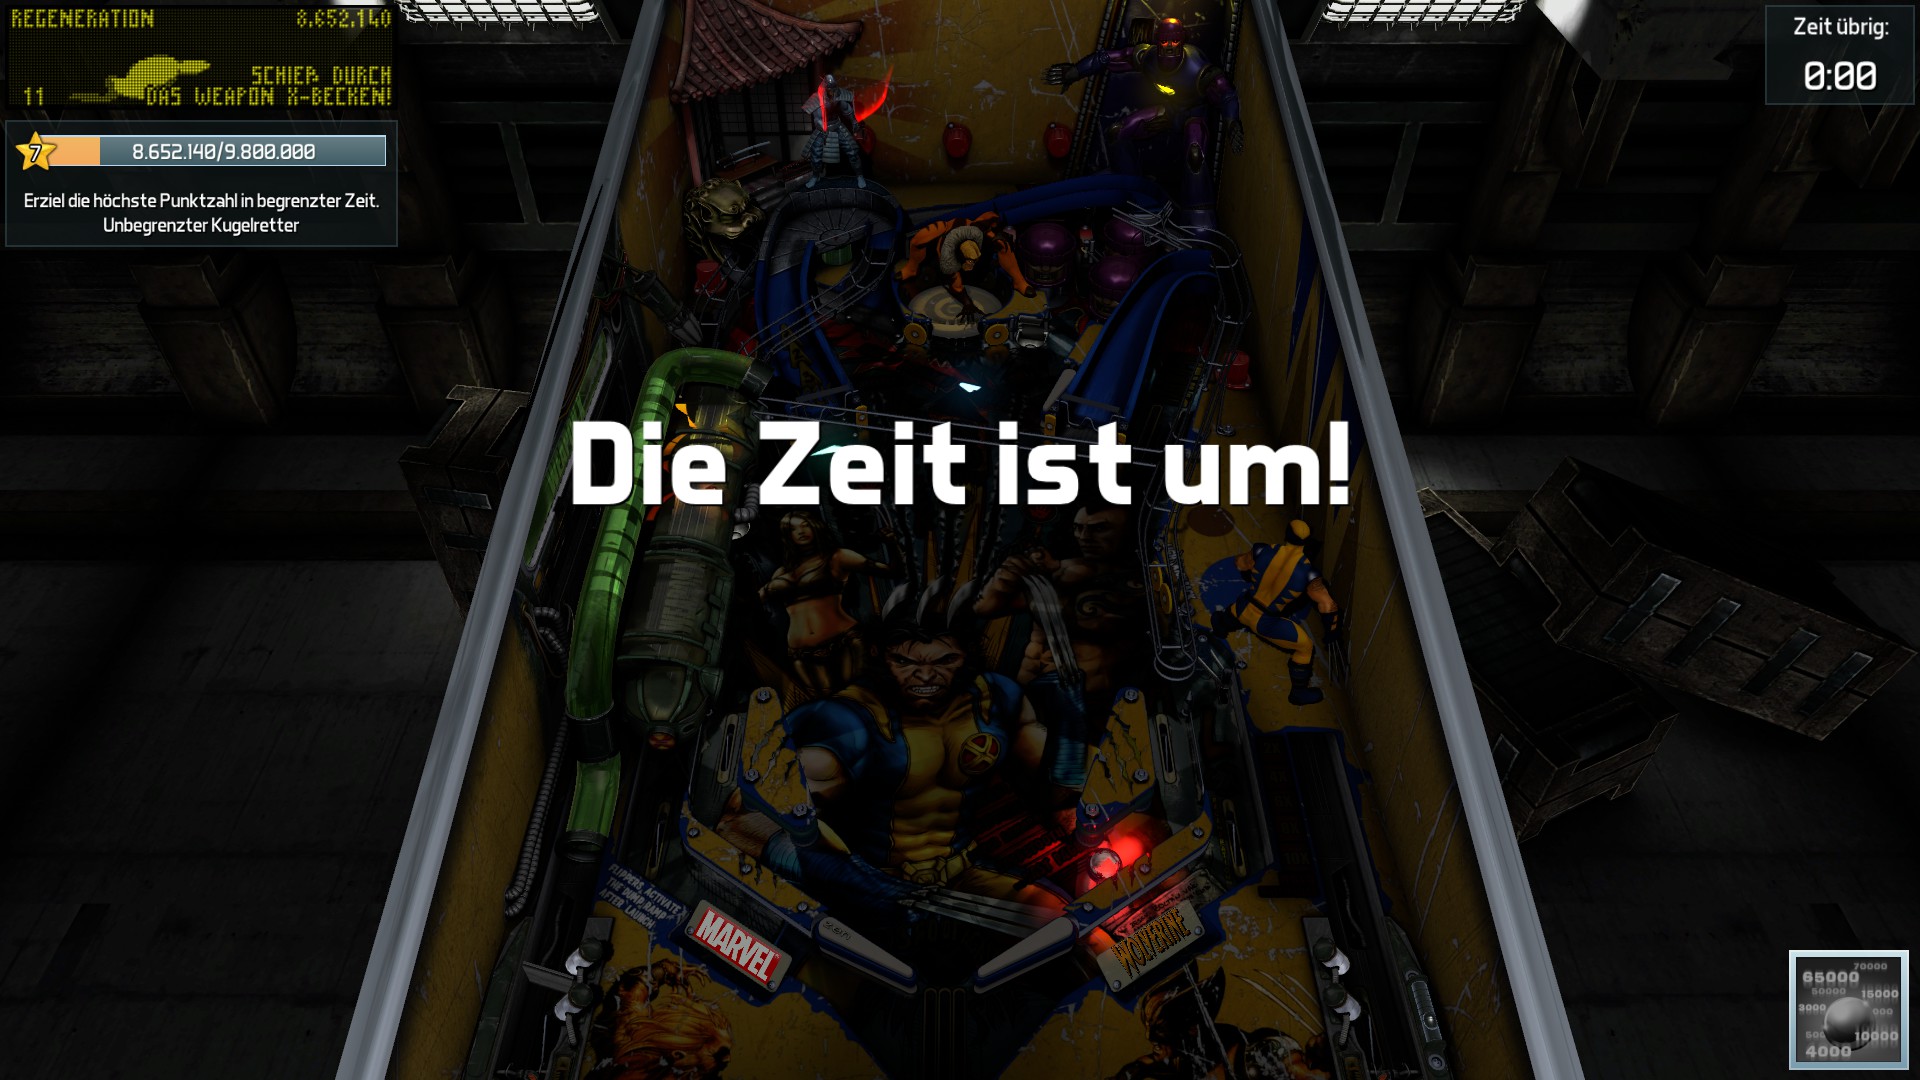 e2e4: Pinball FX3: Wolverine [5 Minute] (PC) 8,652,140 points on 2022-06-18 18:08:11